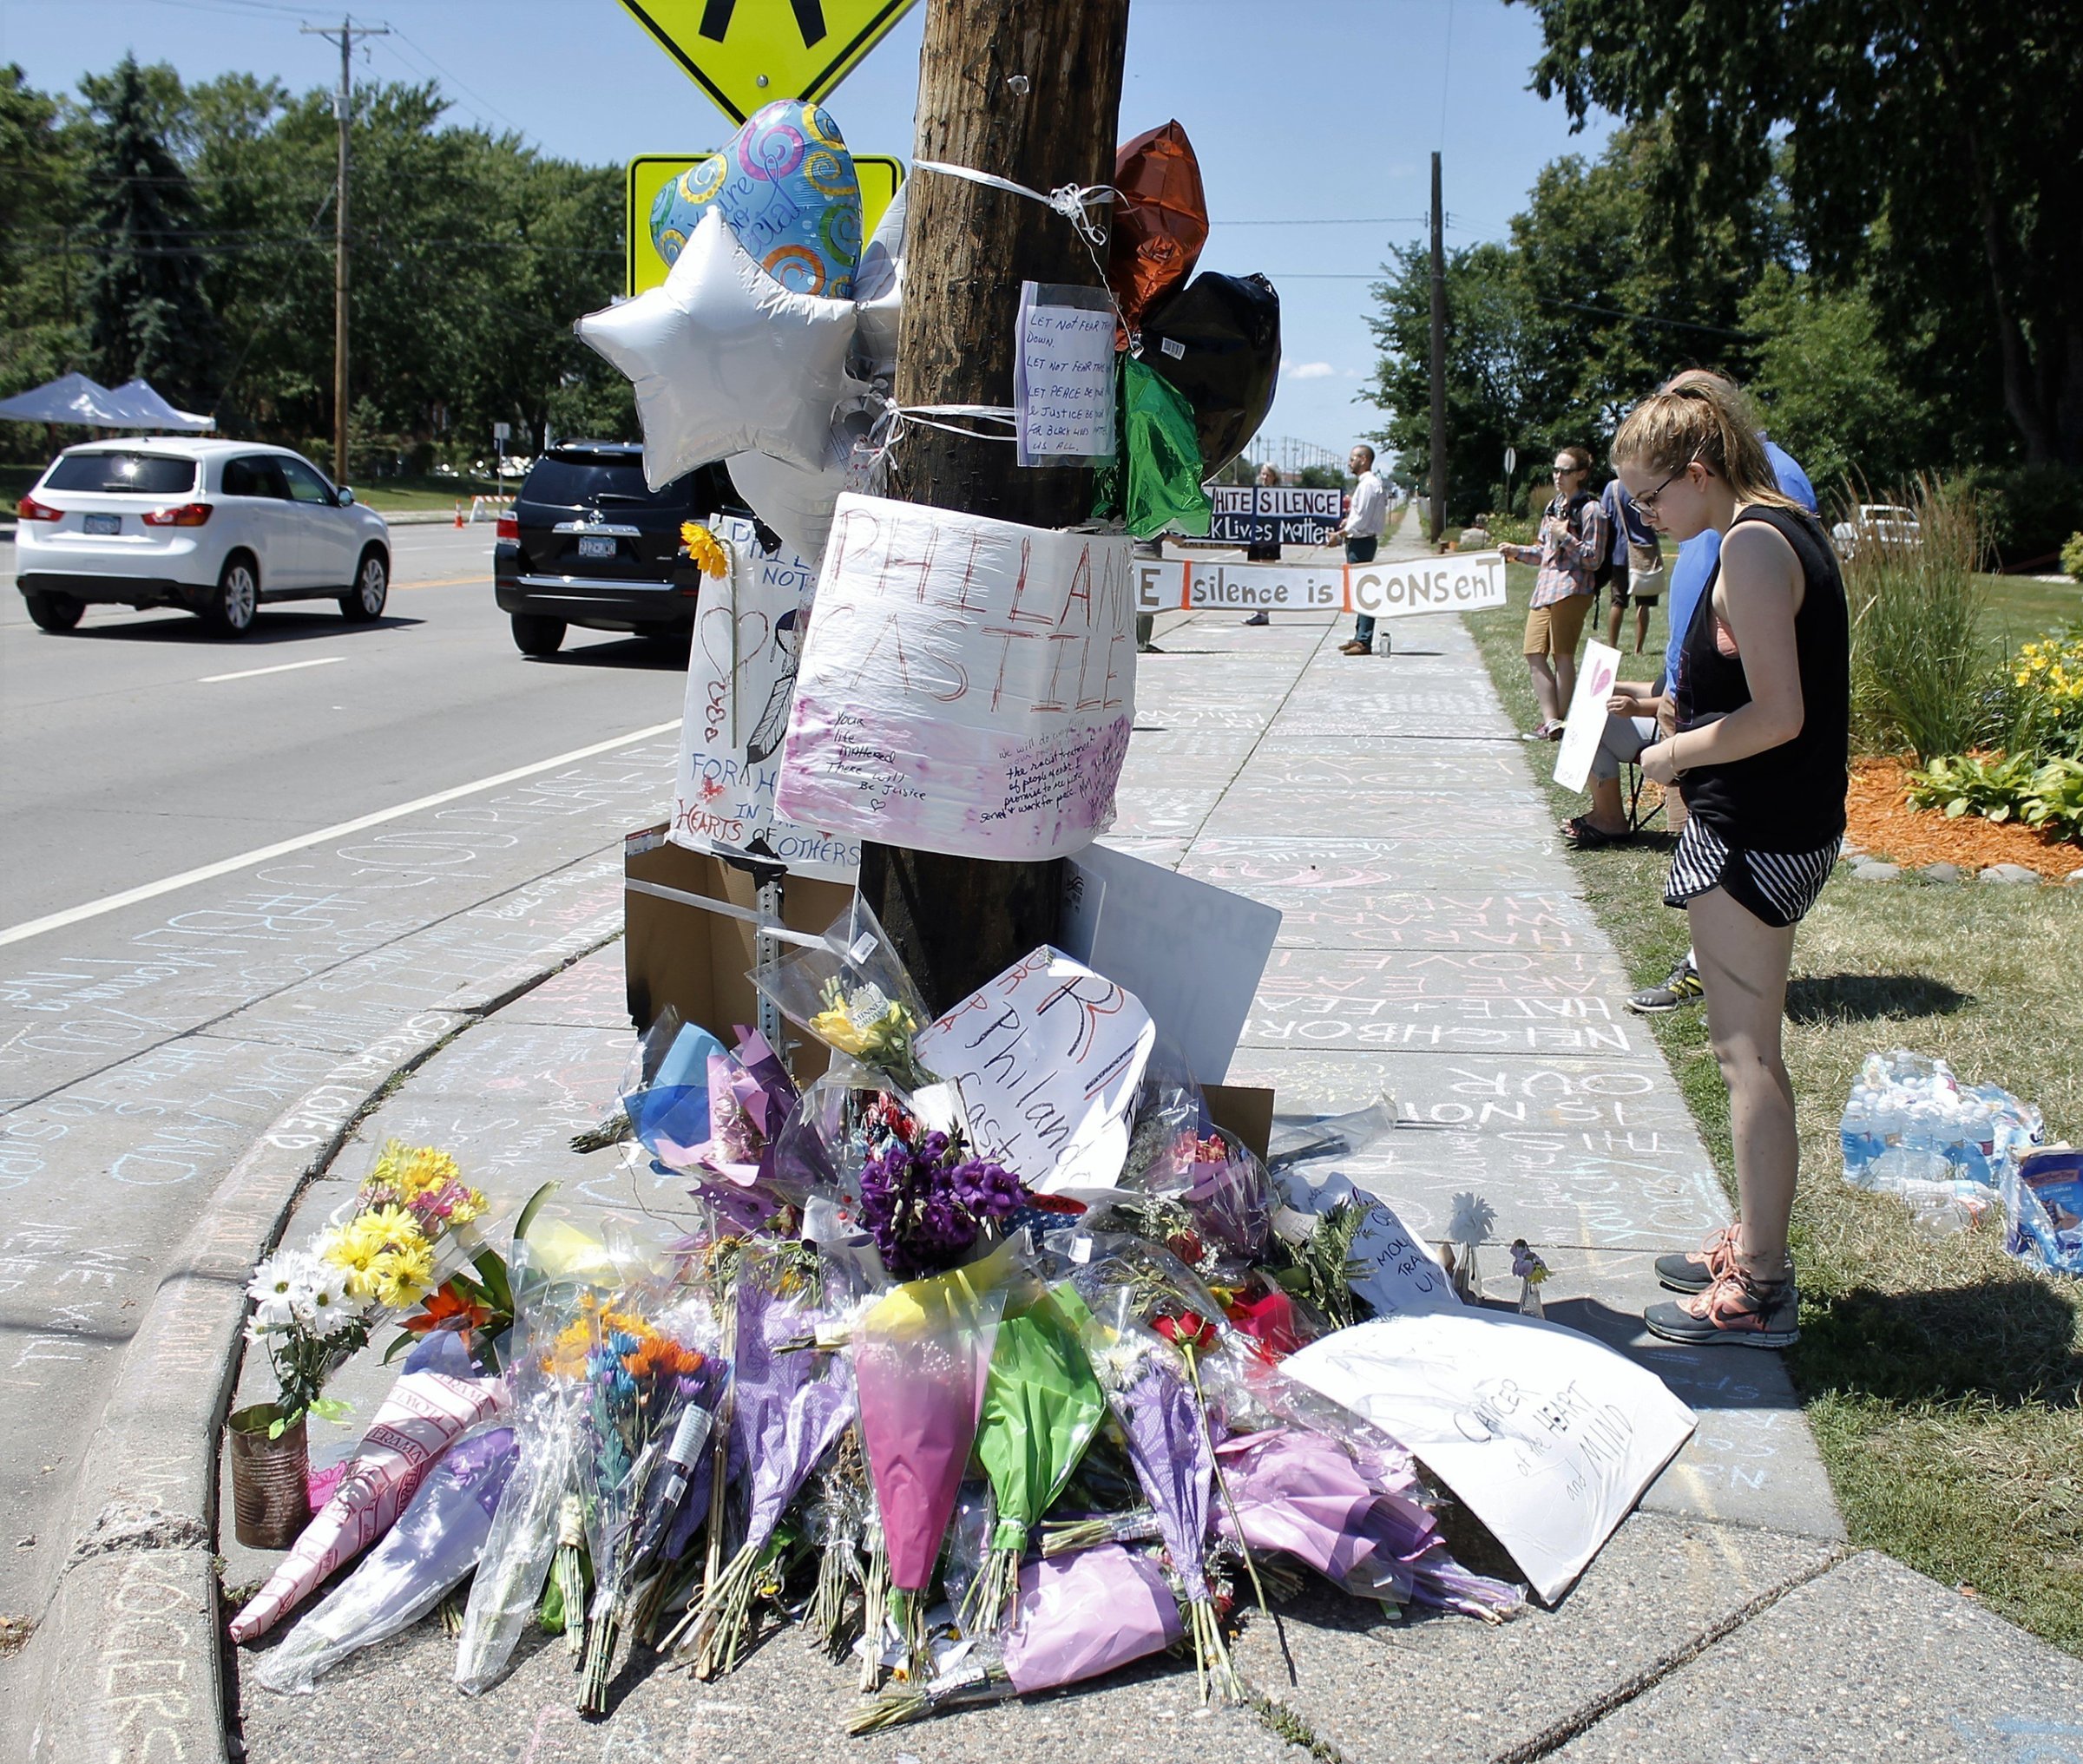 A person looks at a memorial in the Minneapolis suburb of Falcon Heights near the spot where Philando Castile was shot and killed by a police officer, July 9, 2016,.